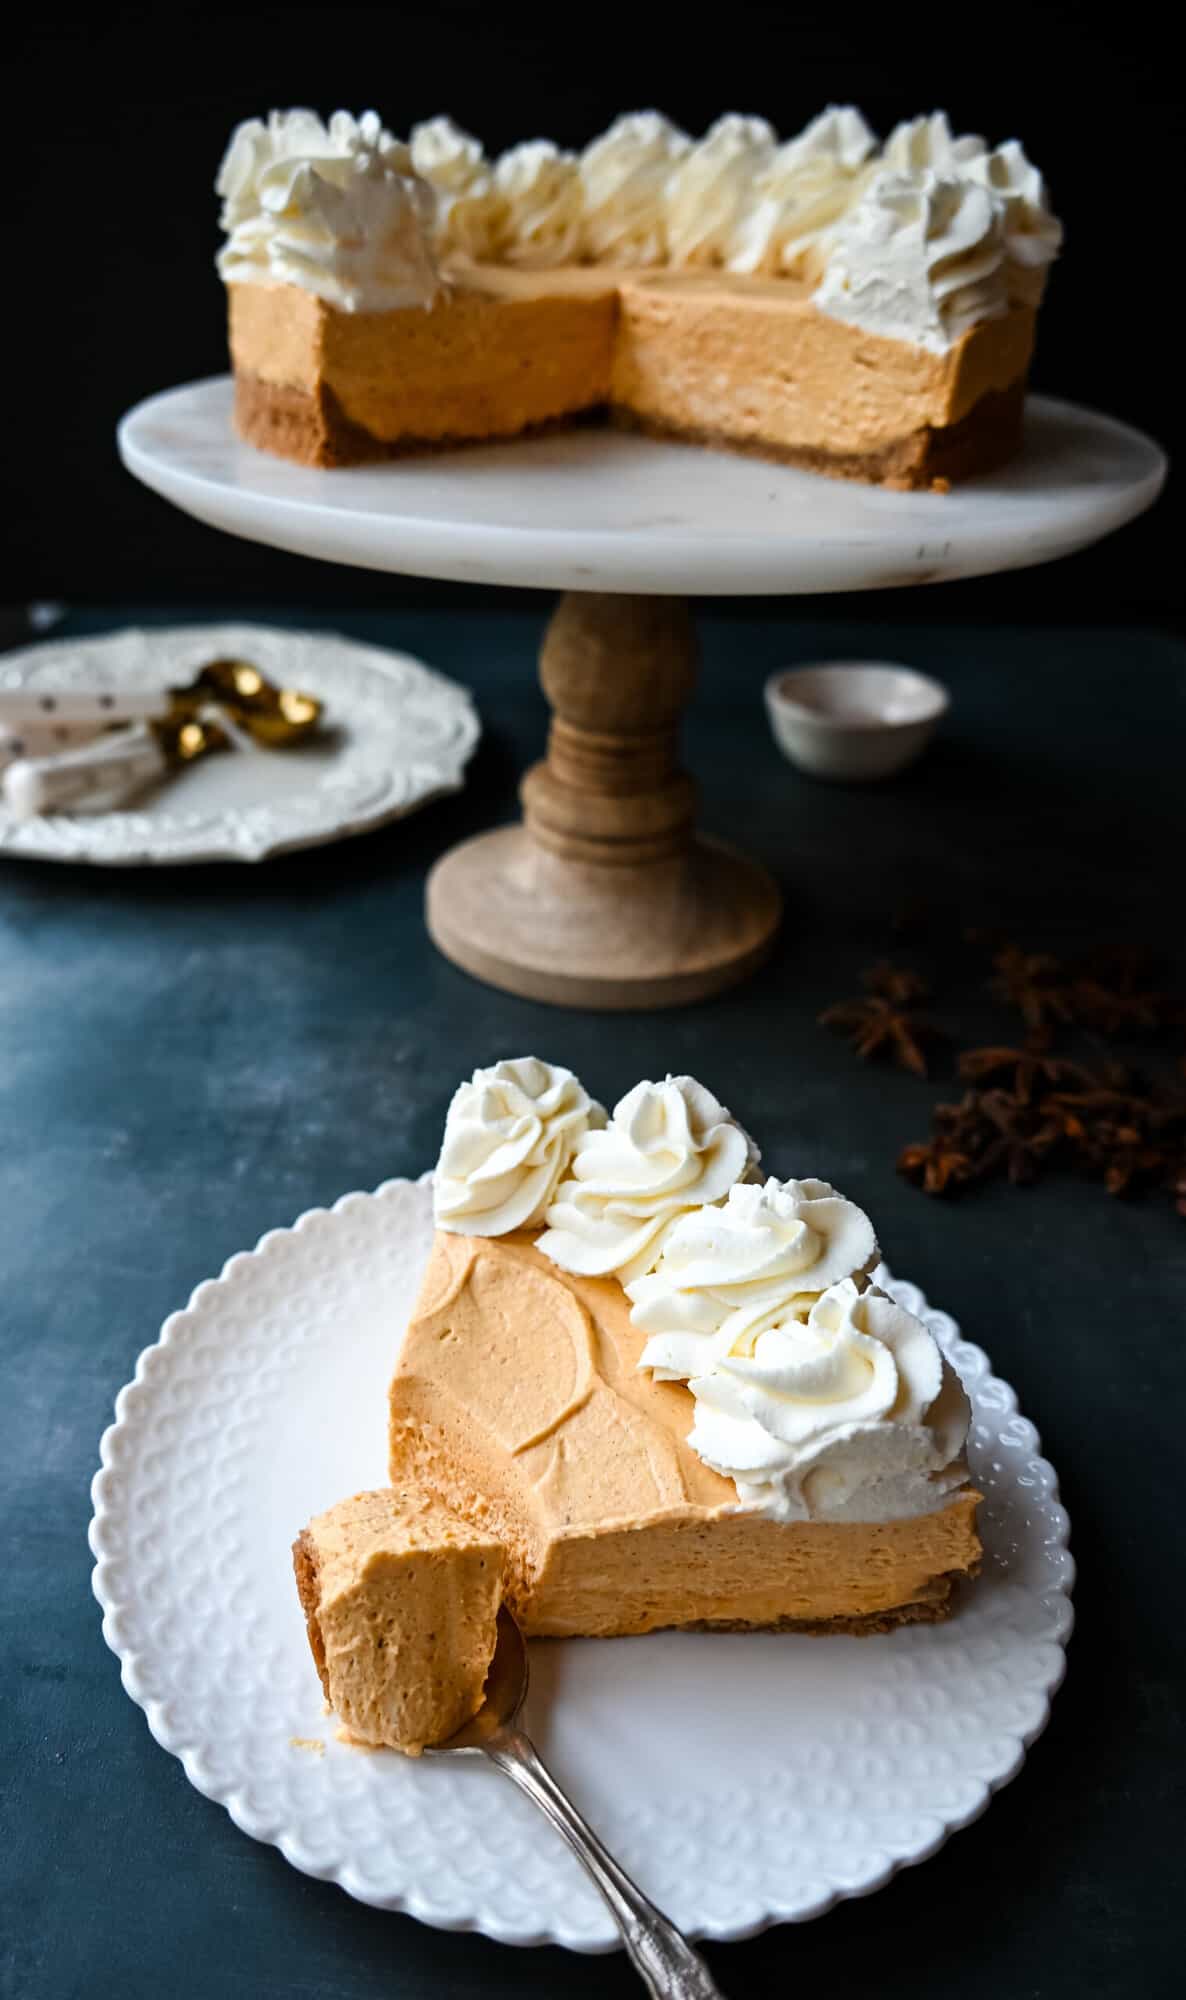 No-Bake Pumpkin Cheesecake. Creamy, smooth pumpkin cheesecake filling in a buttery graham cracker crust topped with whipped cream. This easy, no-bake dessert is perfect for Fall or Thanksgiving gatherings.